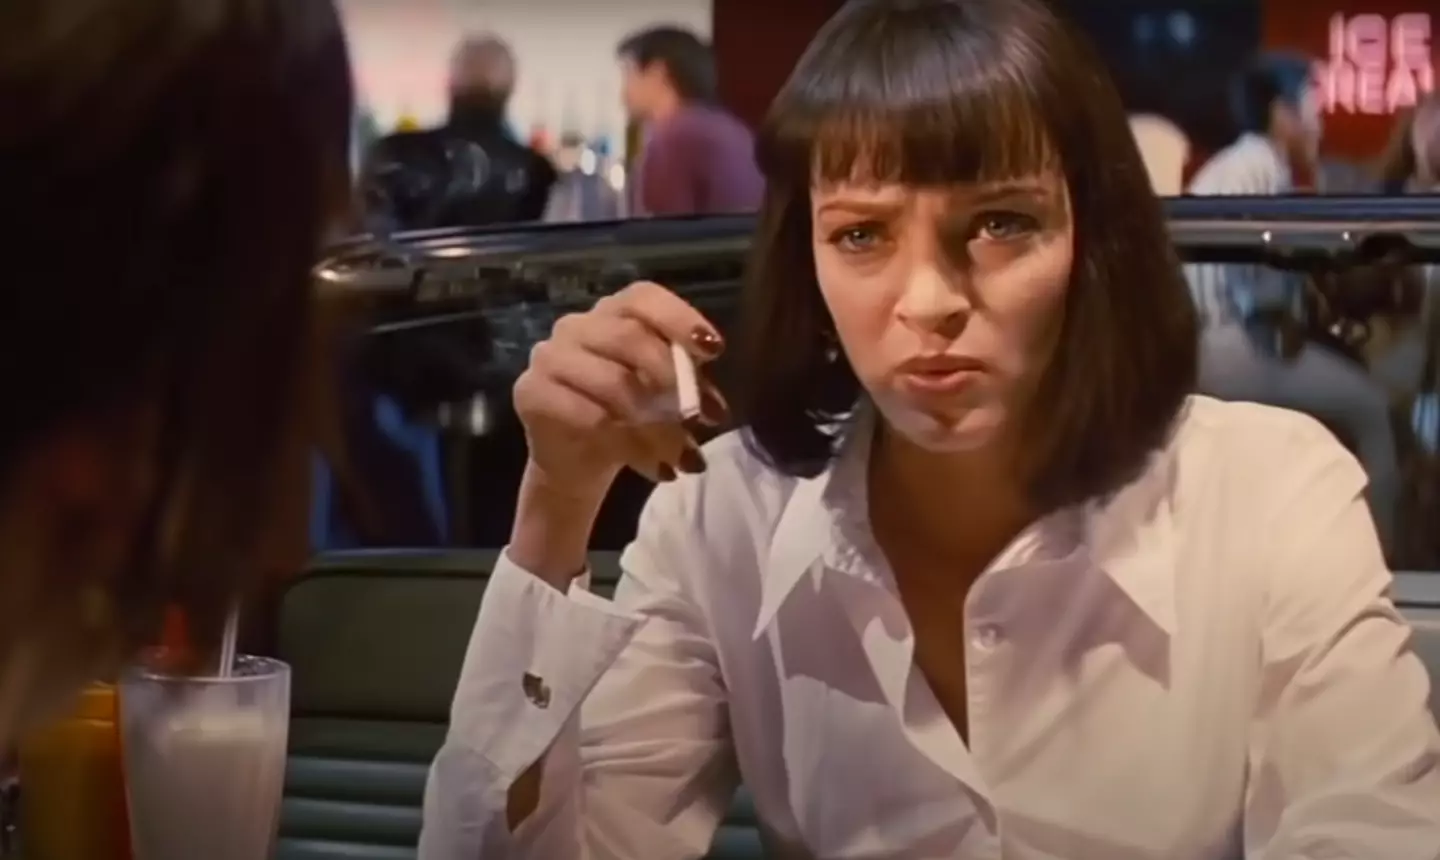 Pulp Fiction was released in 1994.